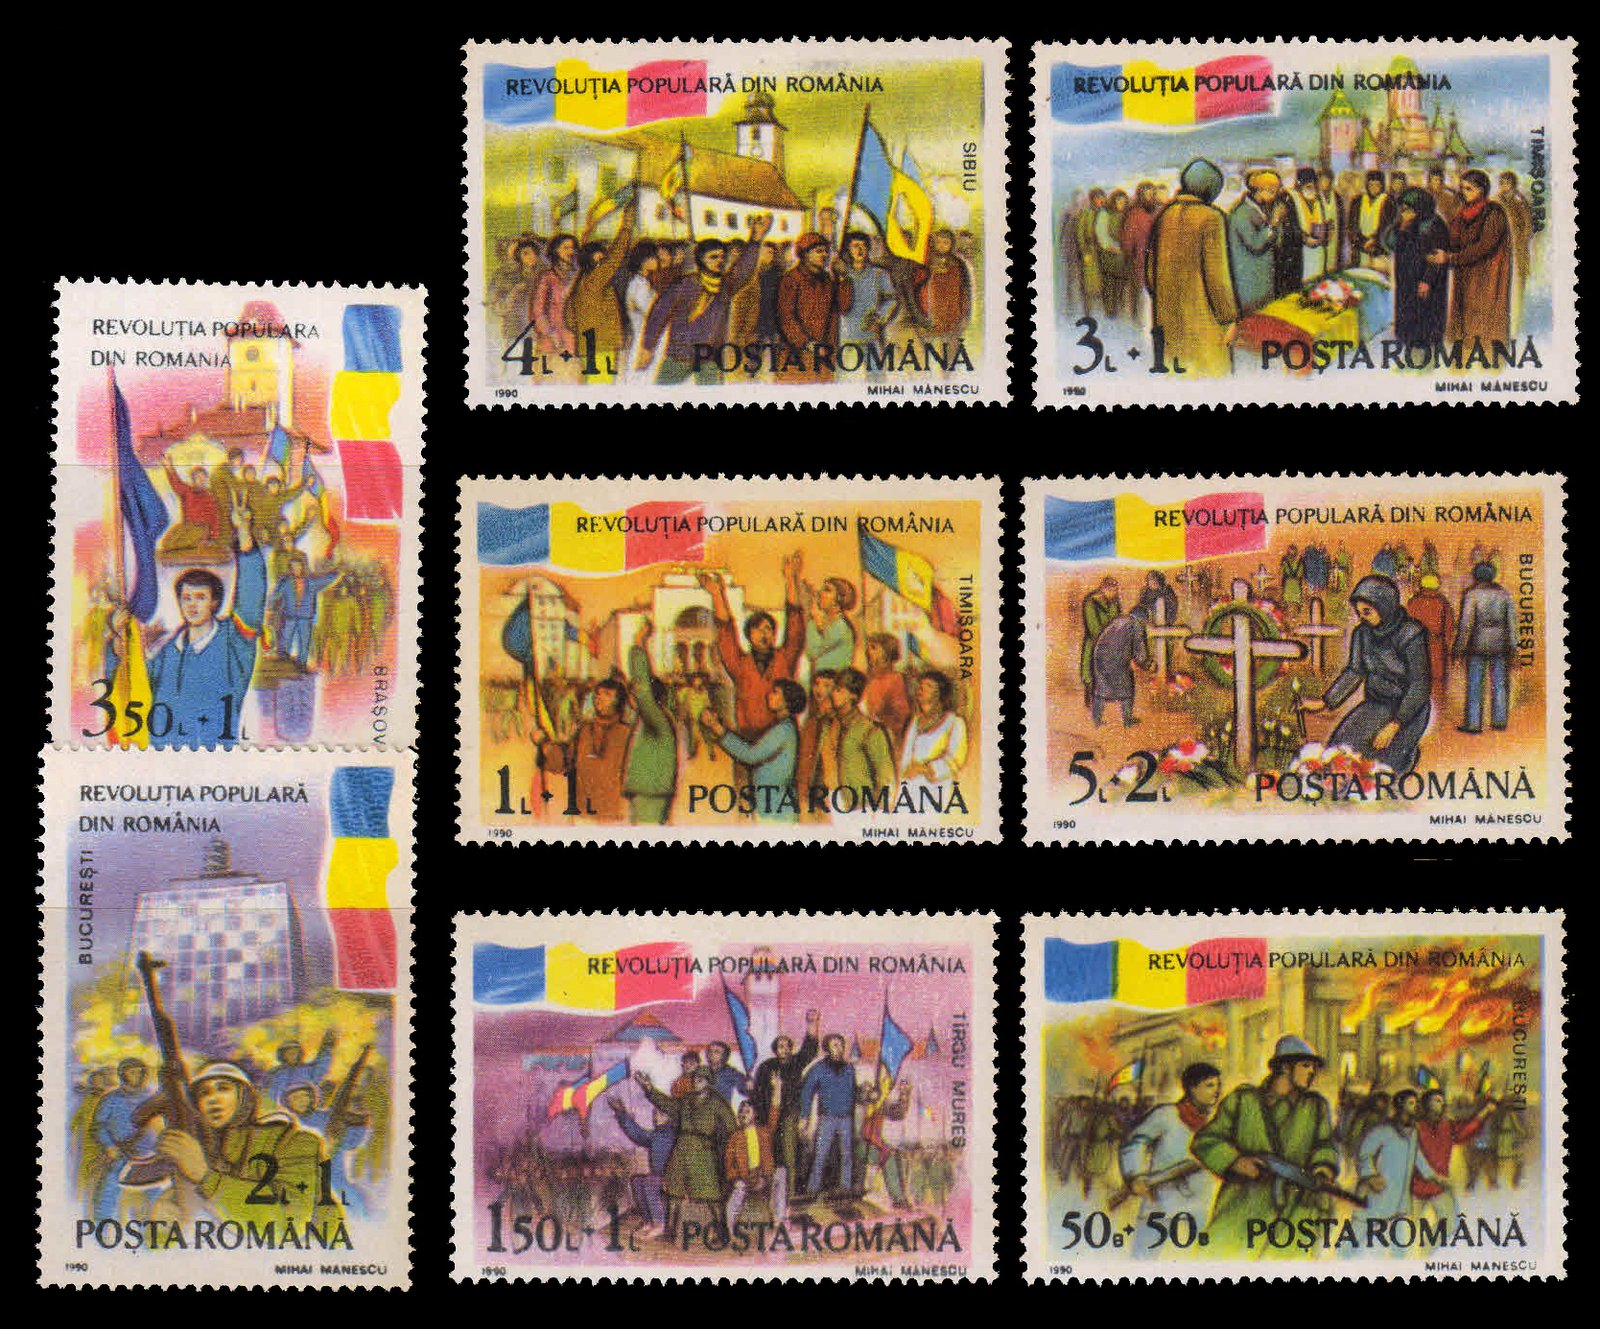 ROMANIA 1990-Popular Uprising, Soldier, Crowd with Banner, Set of 8, MNH, S.G. 5294-01-Cat £ 9-